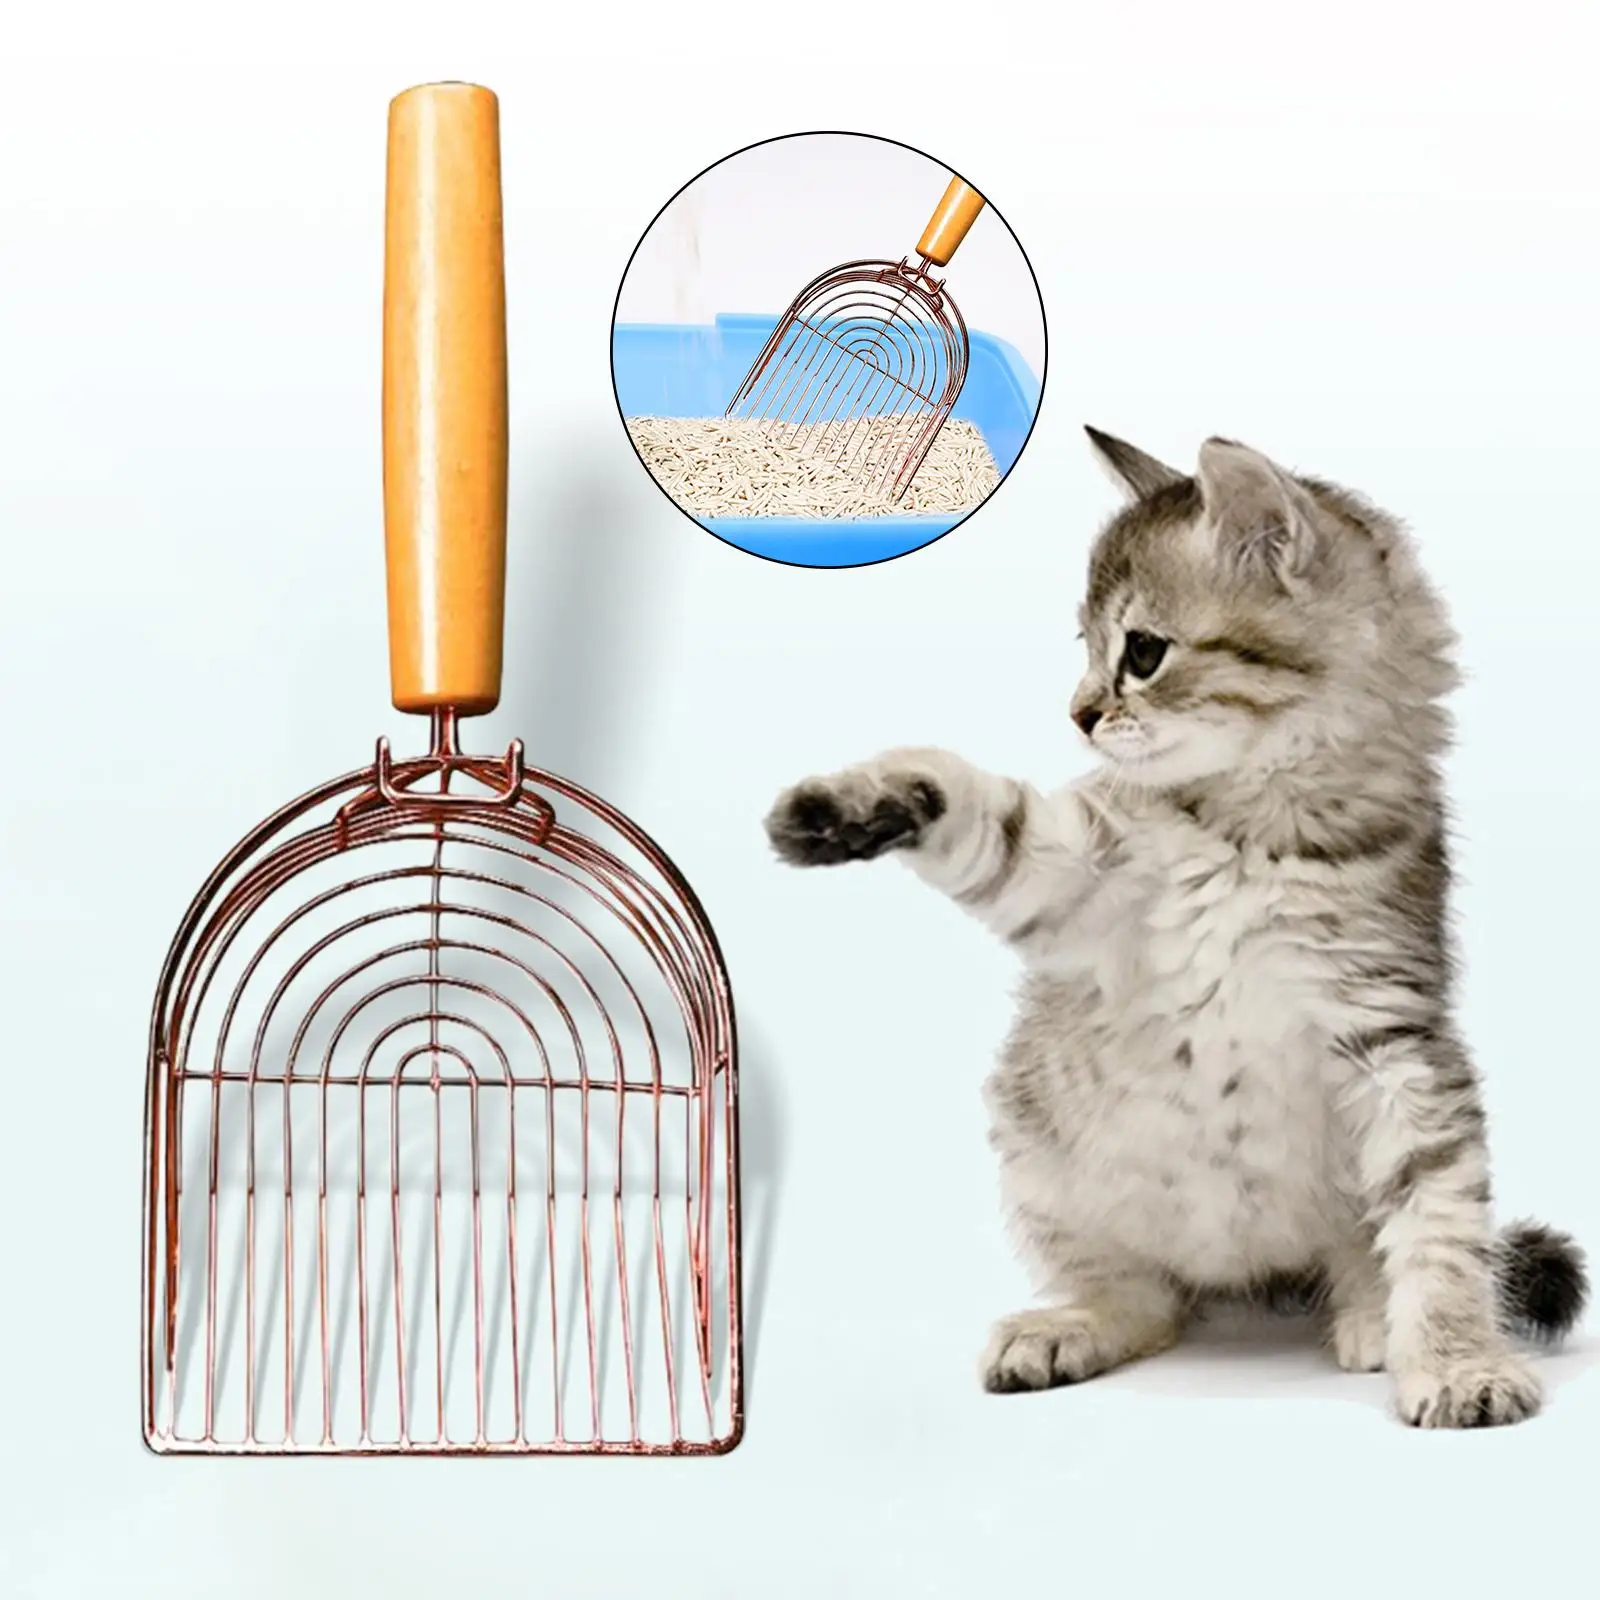 Portable Cat Litter Scooper Pet Litter Sifter Scooper with Handle Cat Sand Toilet Cleaning Tool Pets Supplies